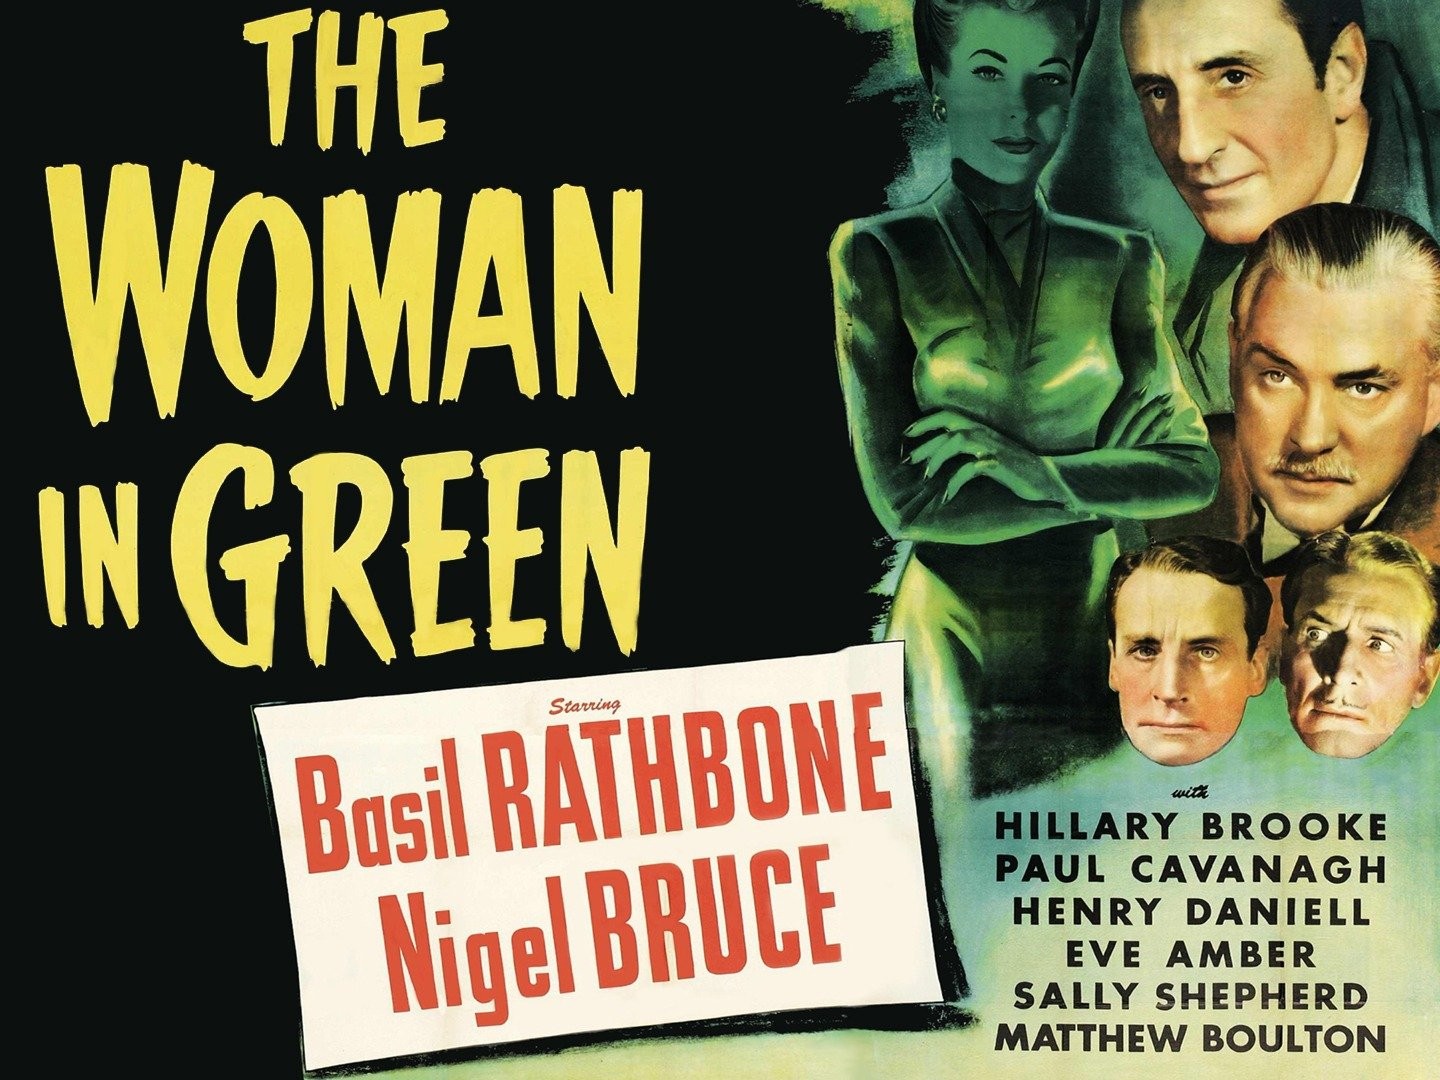 The Woman in Green